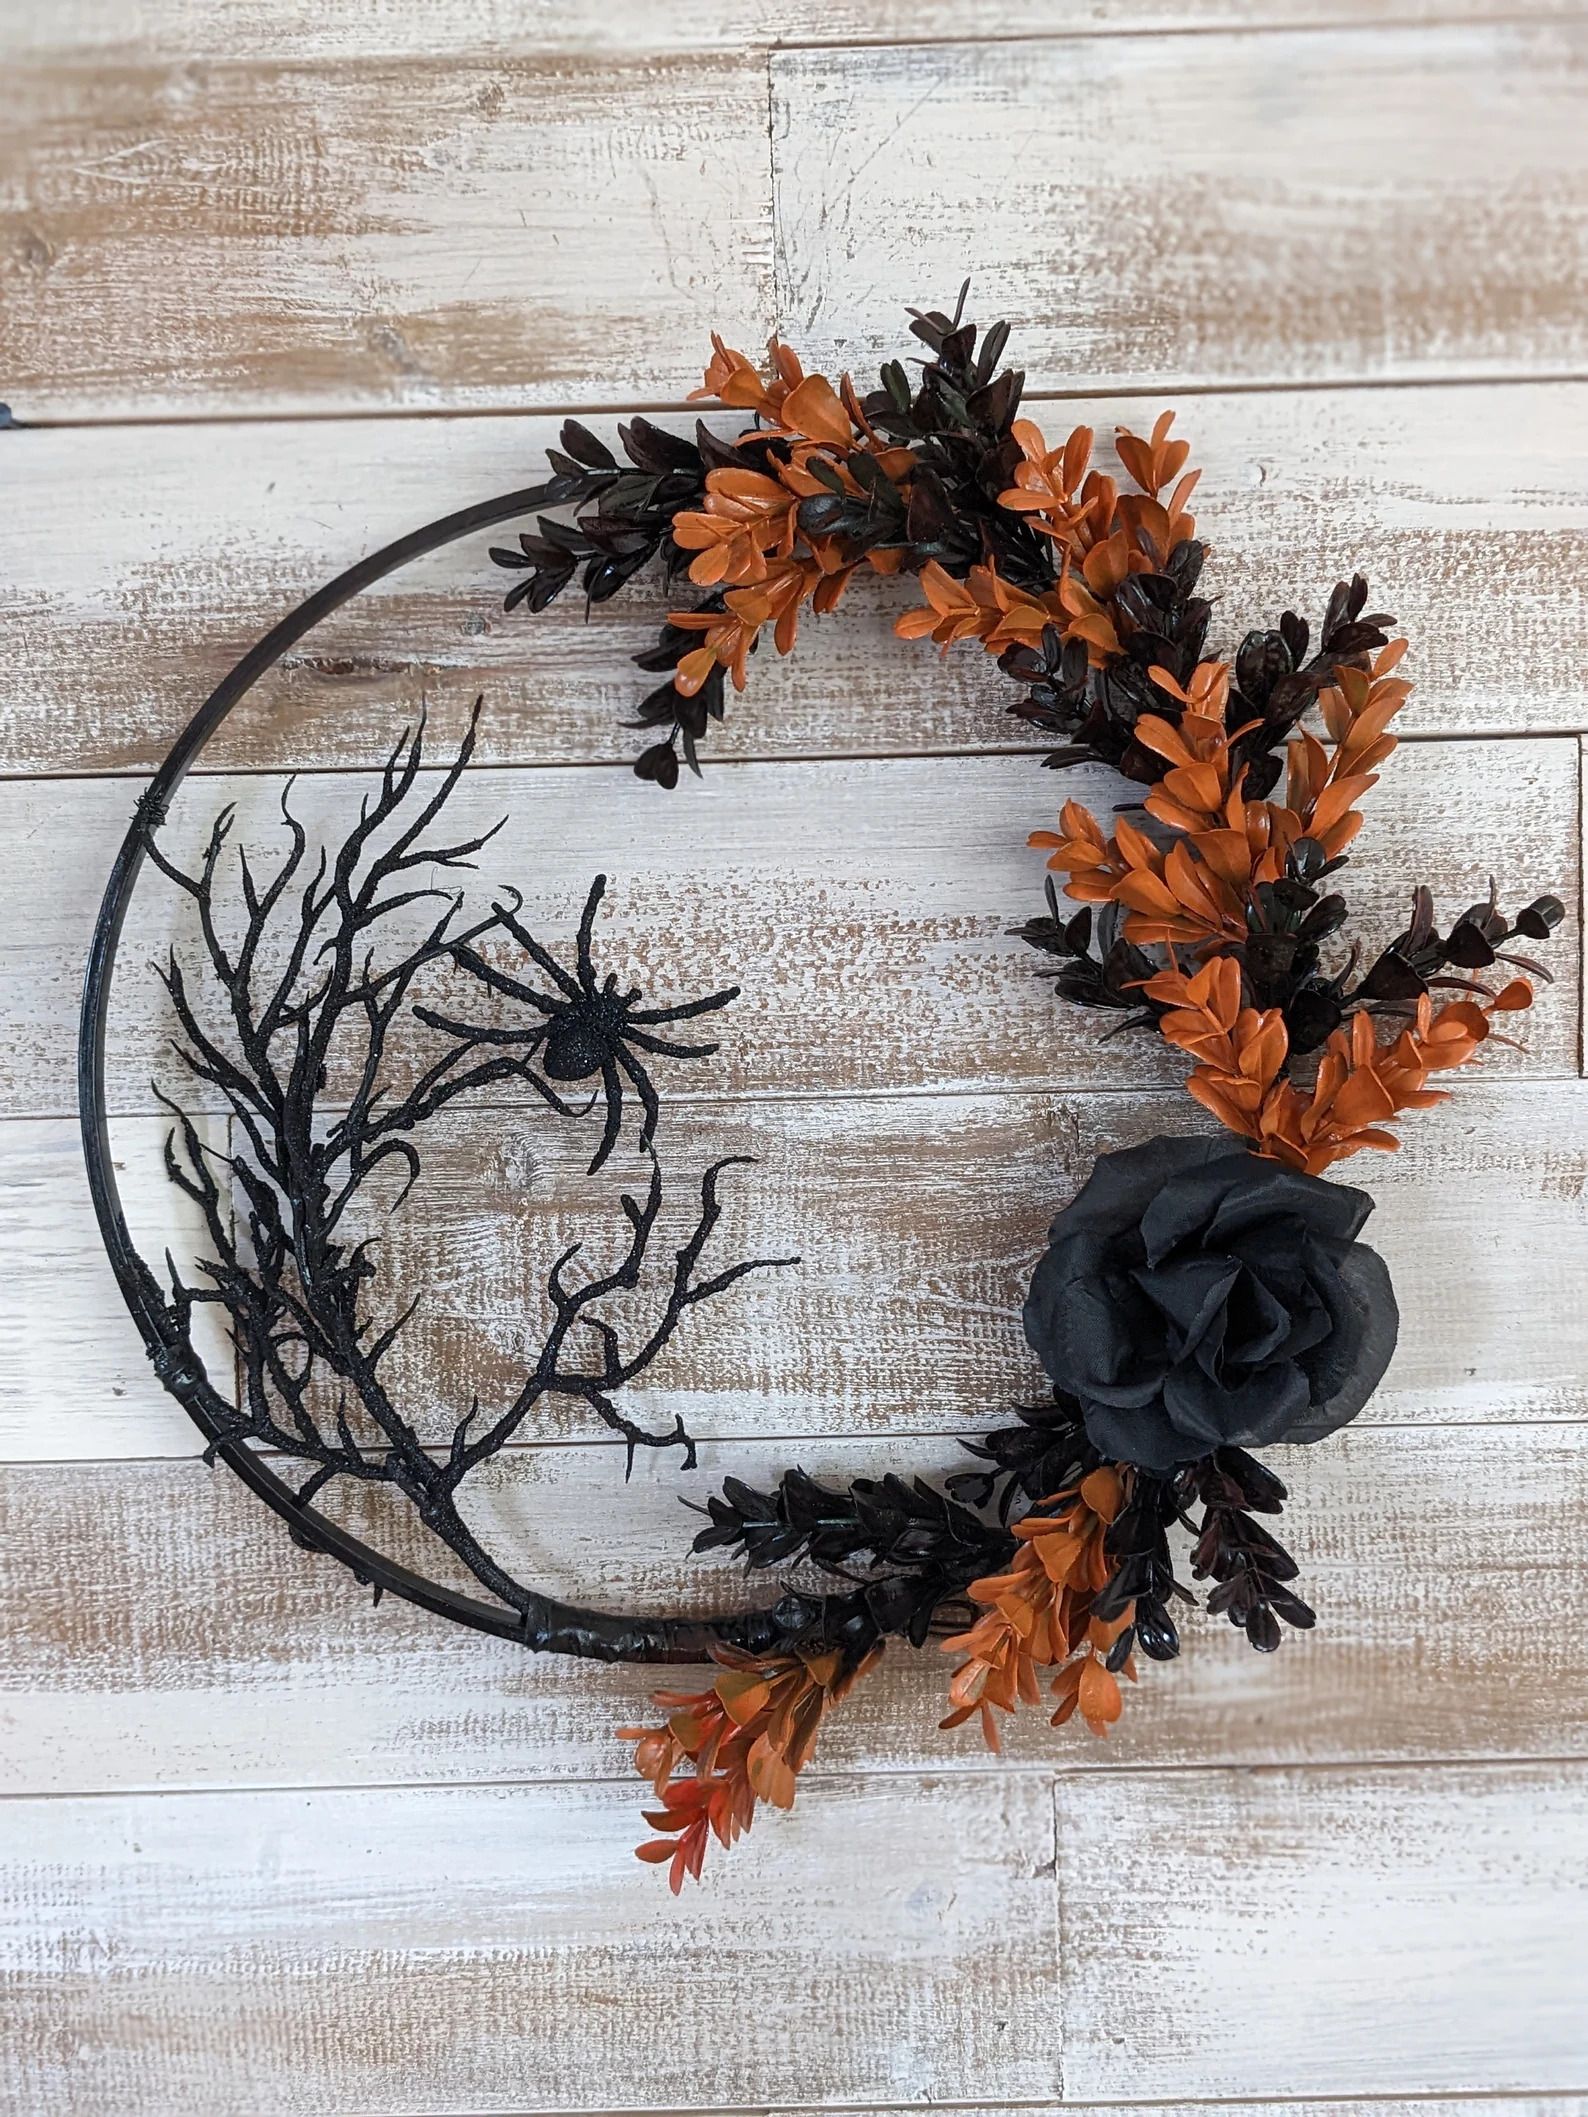 18 Freaky Spider Wreath Designs For Halloween